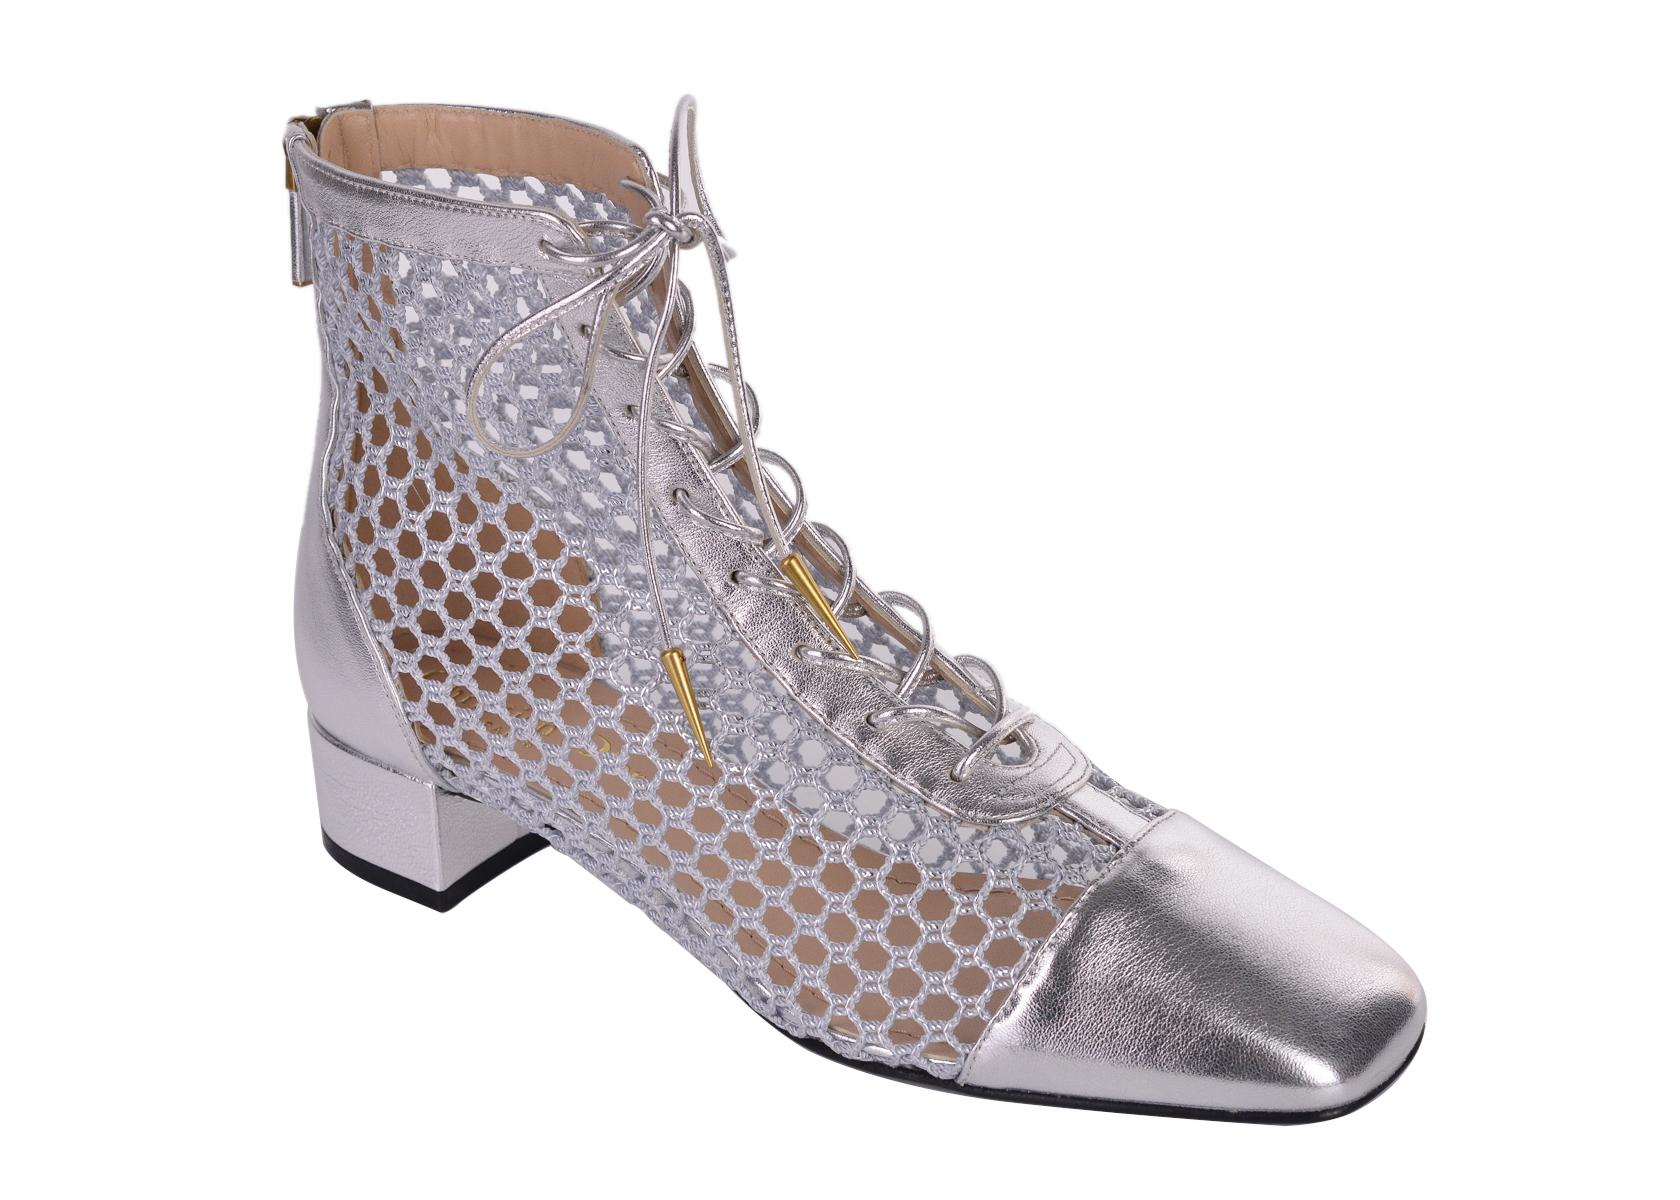 Christian Dior's Naughtily-D ankle boots. These boots feature an all over metallic laminated design for this eccentric ankle boot. Perfect stand out shoes for that accented accessories in your everyday wardrobe. 

Christian Dior's Naughtily-D ankle